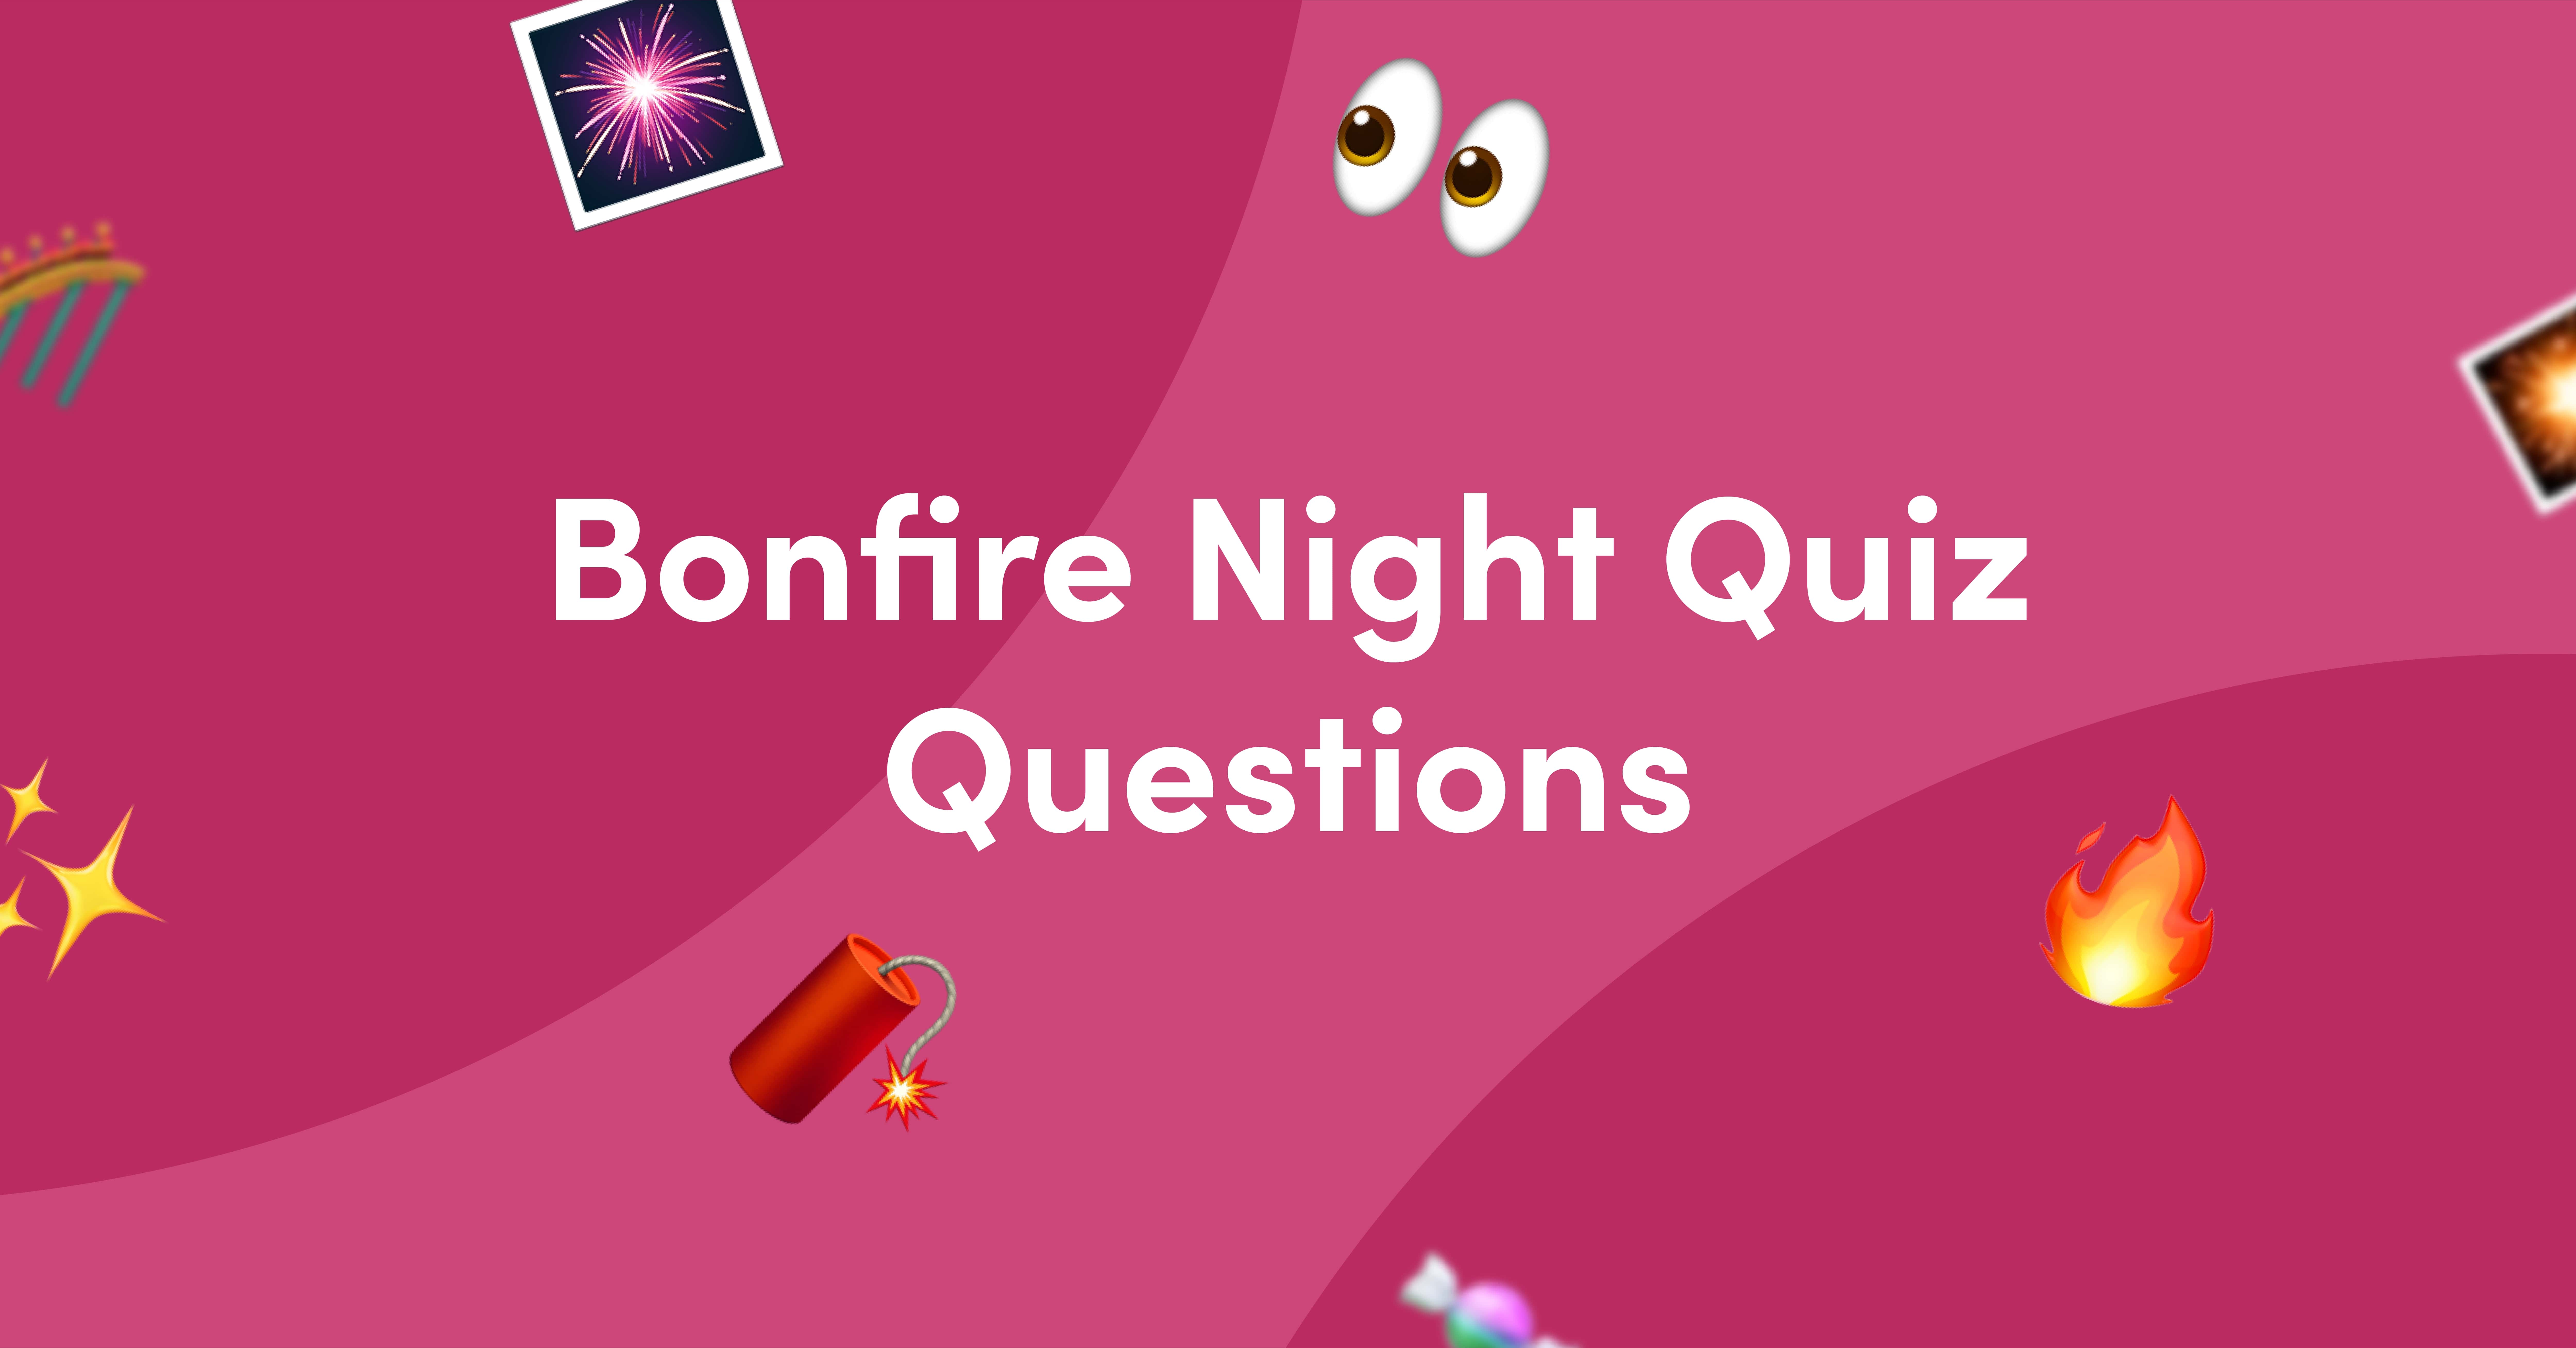 Pink background with emojis for Bonfire Night quiz quiz questions and answers